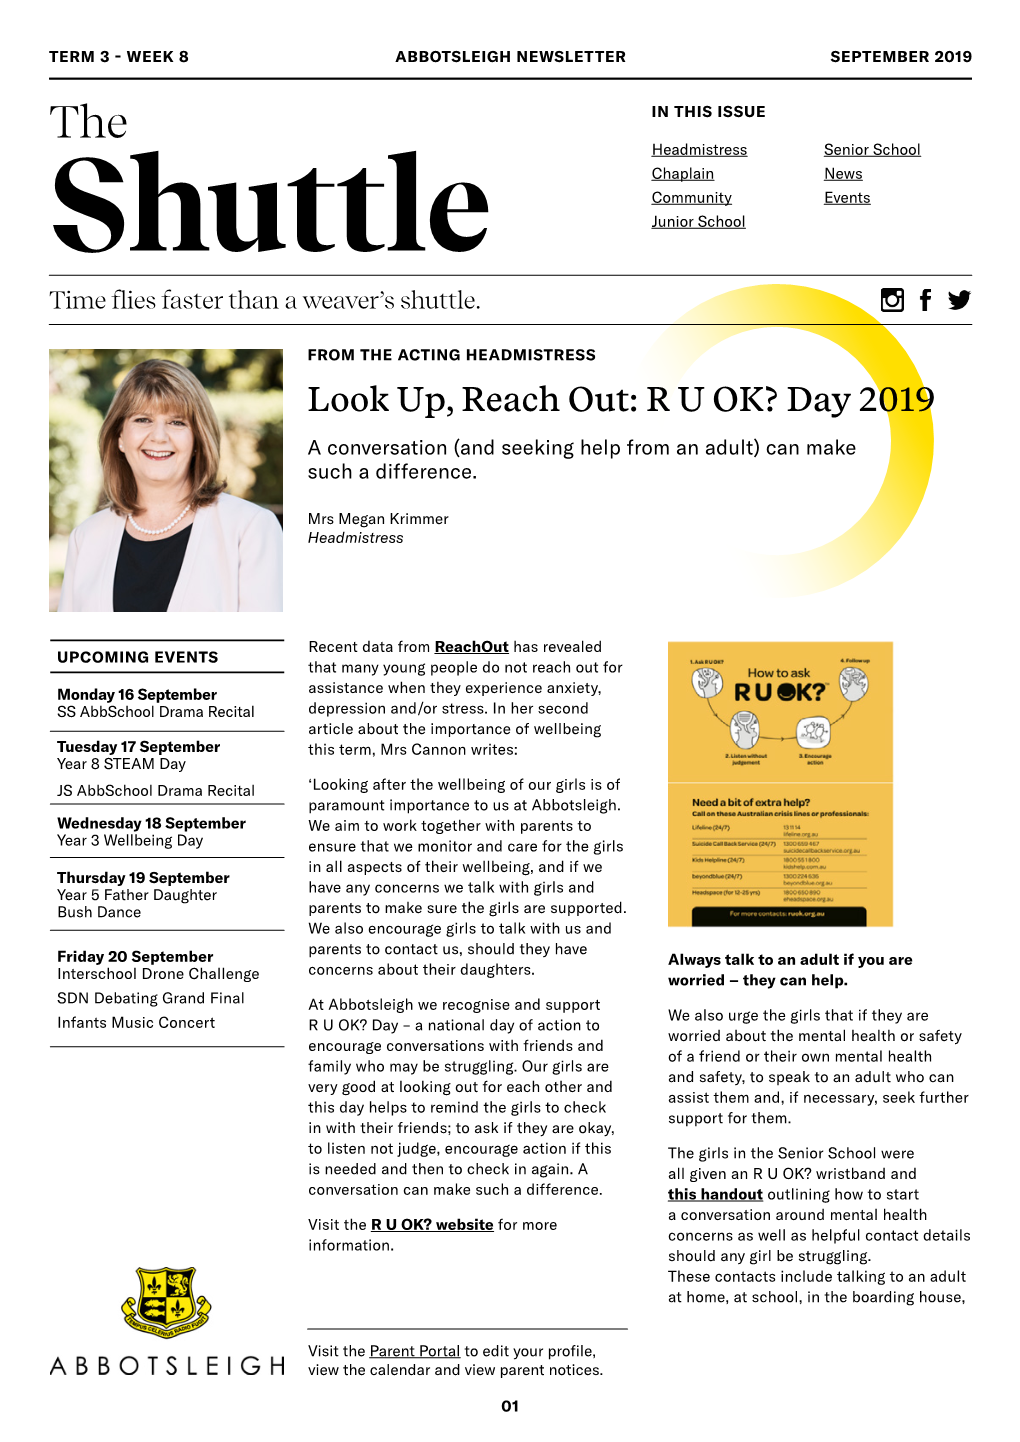 Look Up, Reach Out: R U OK? Day 2019 a Conversation (And Seeking Help from an Adult) Can Make Such a Difference